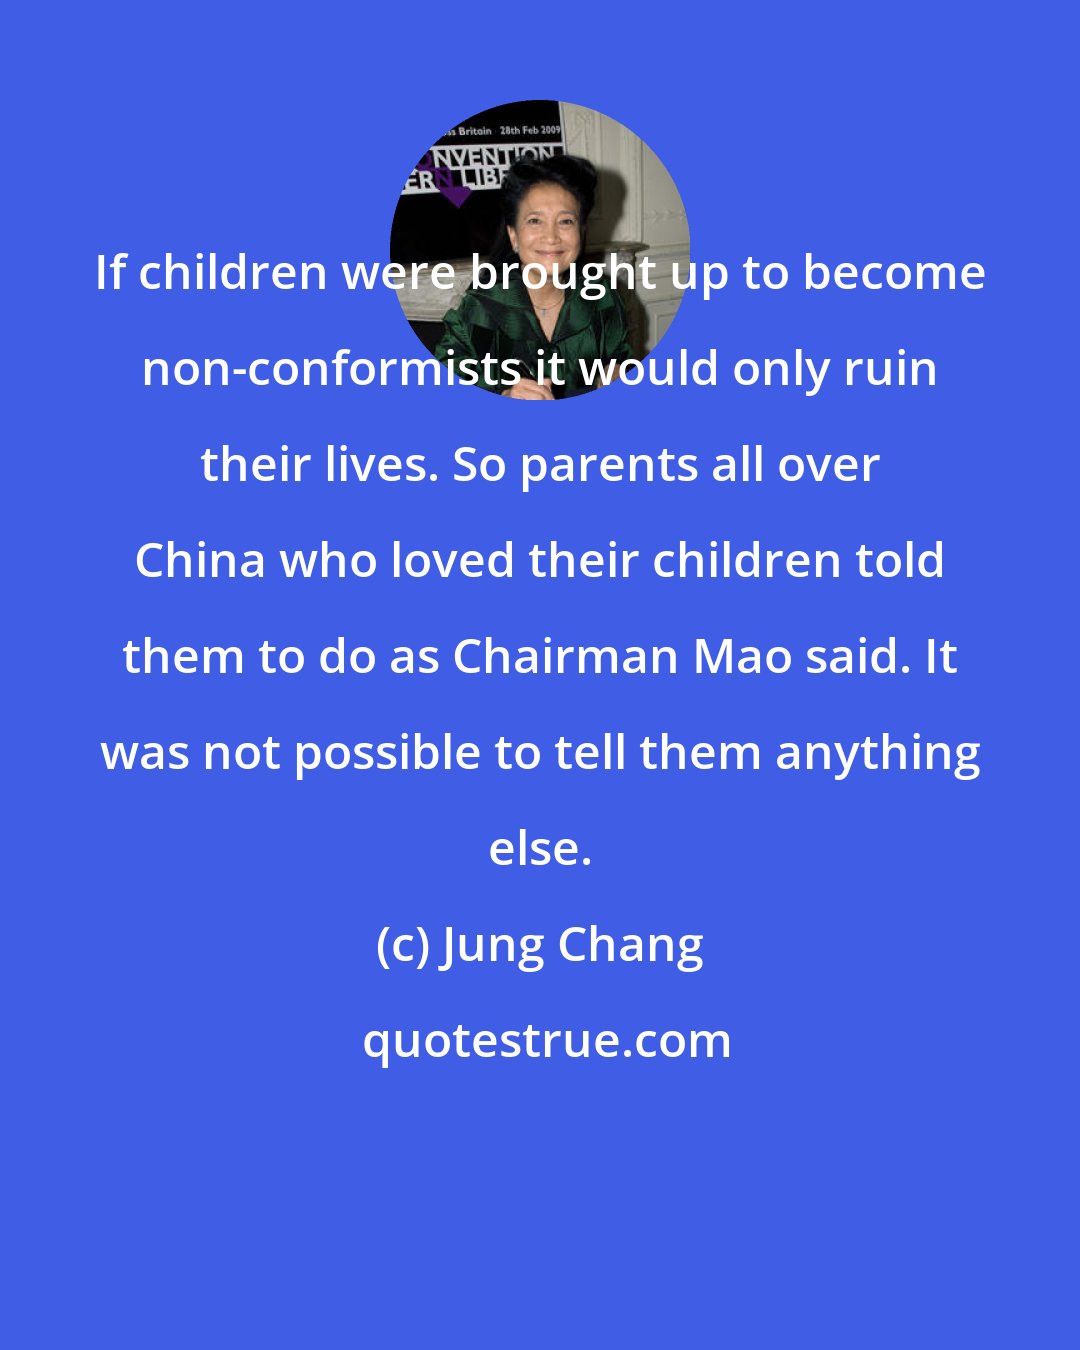 Jung Chang: If children were brought up to become non-conformists it would only ruin their lives. So parents all over China who loved their children told them to do as Chairman Mao said. It was not possible to tell them anything else.